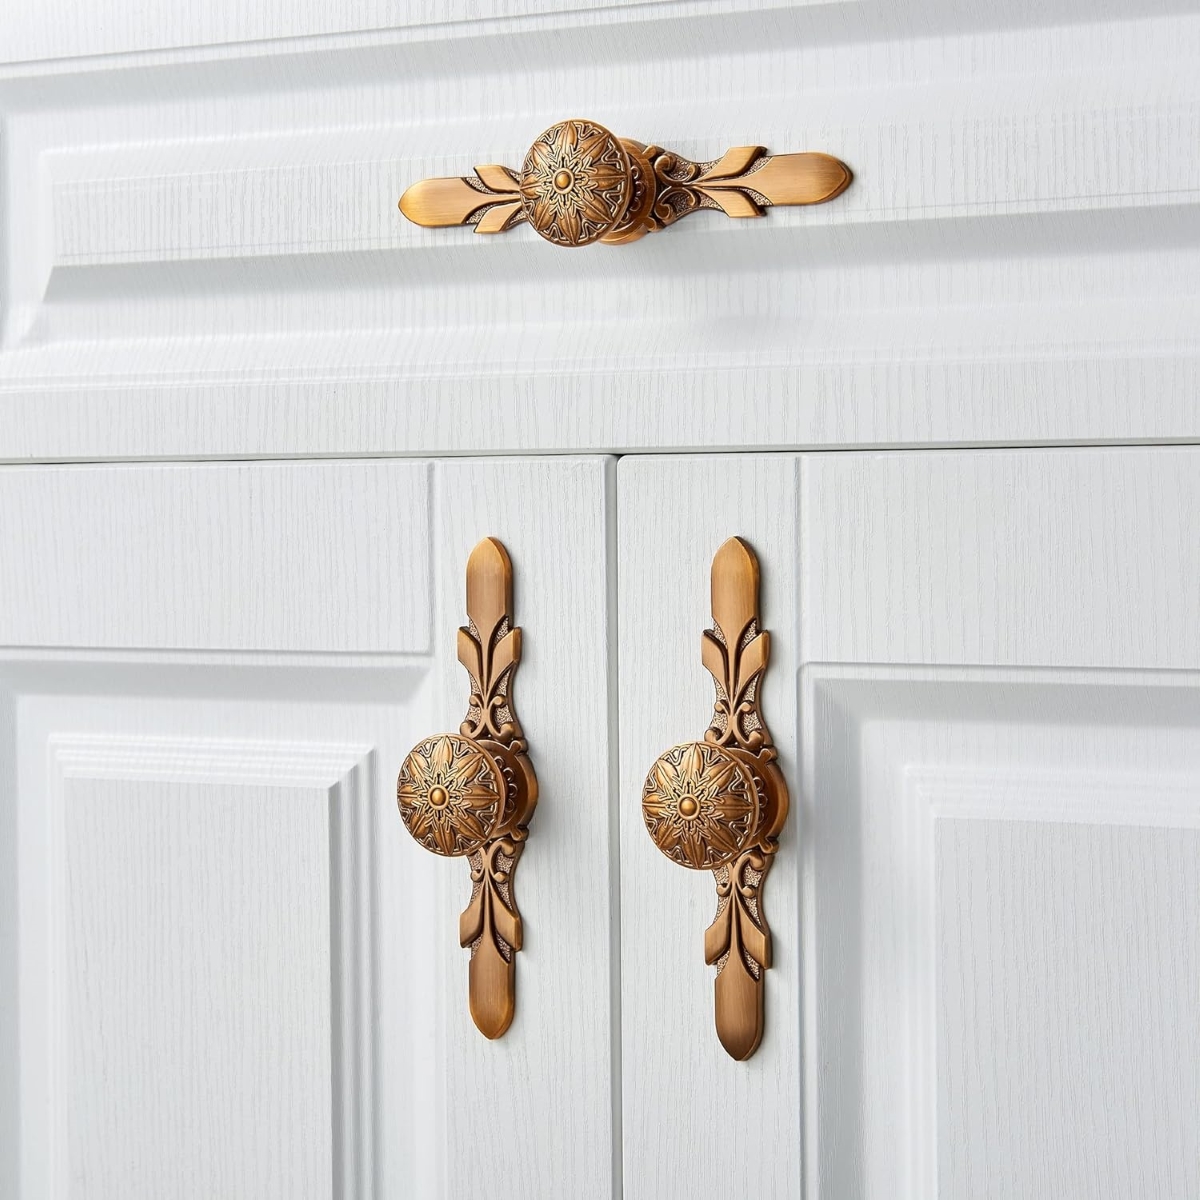 Copper antique hardware on white cabinets.